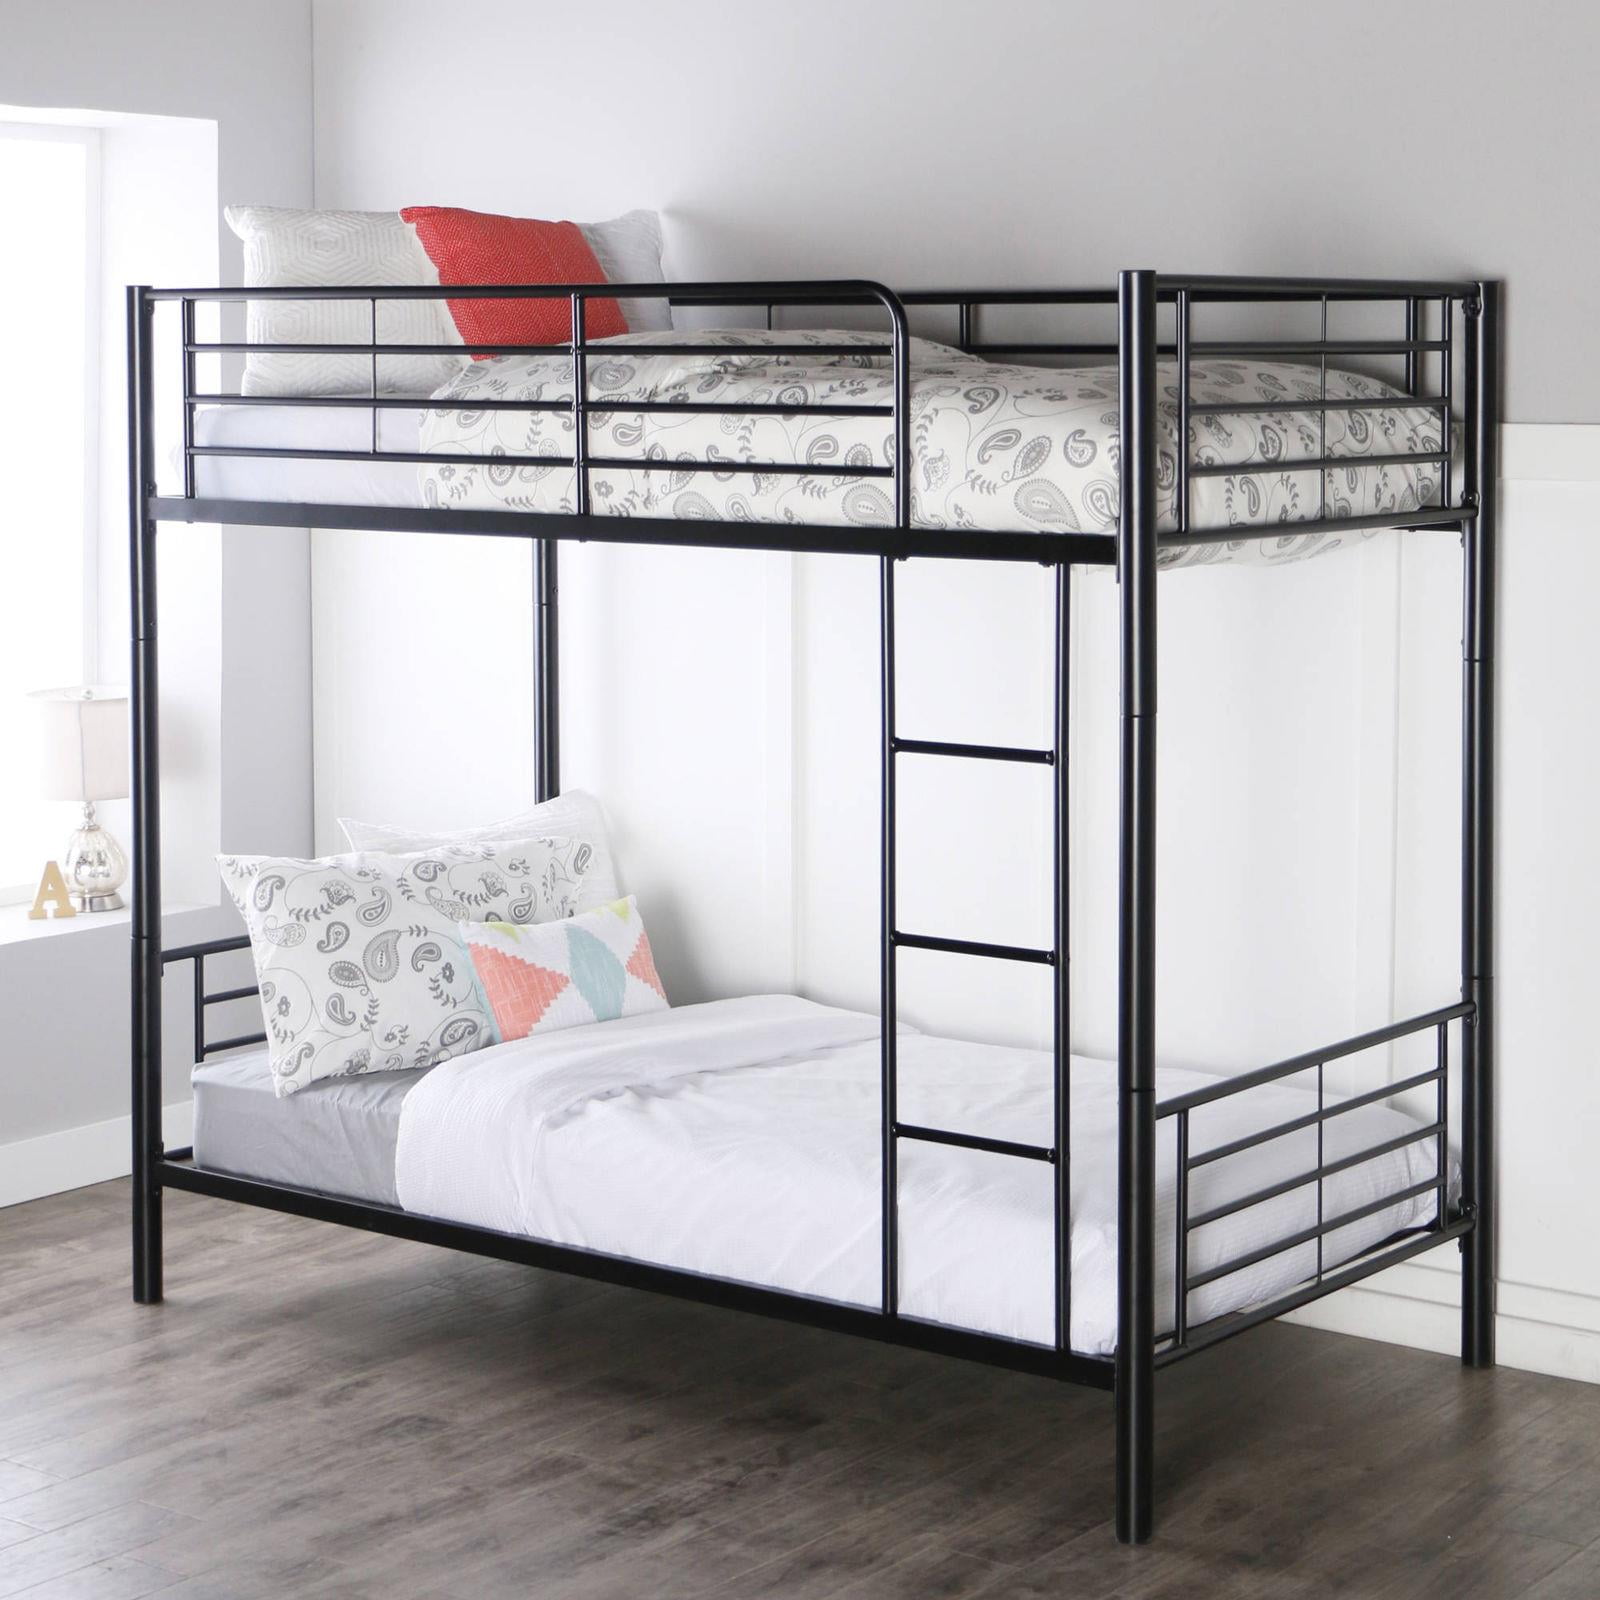 Details about   Dorm for Kids Adult Children Metal Bunk Beds Frame Twin over Twin Ladder NEW 